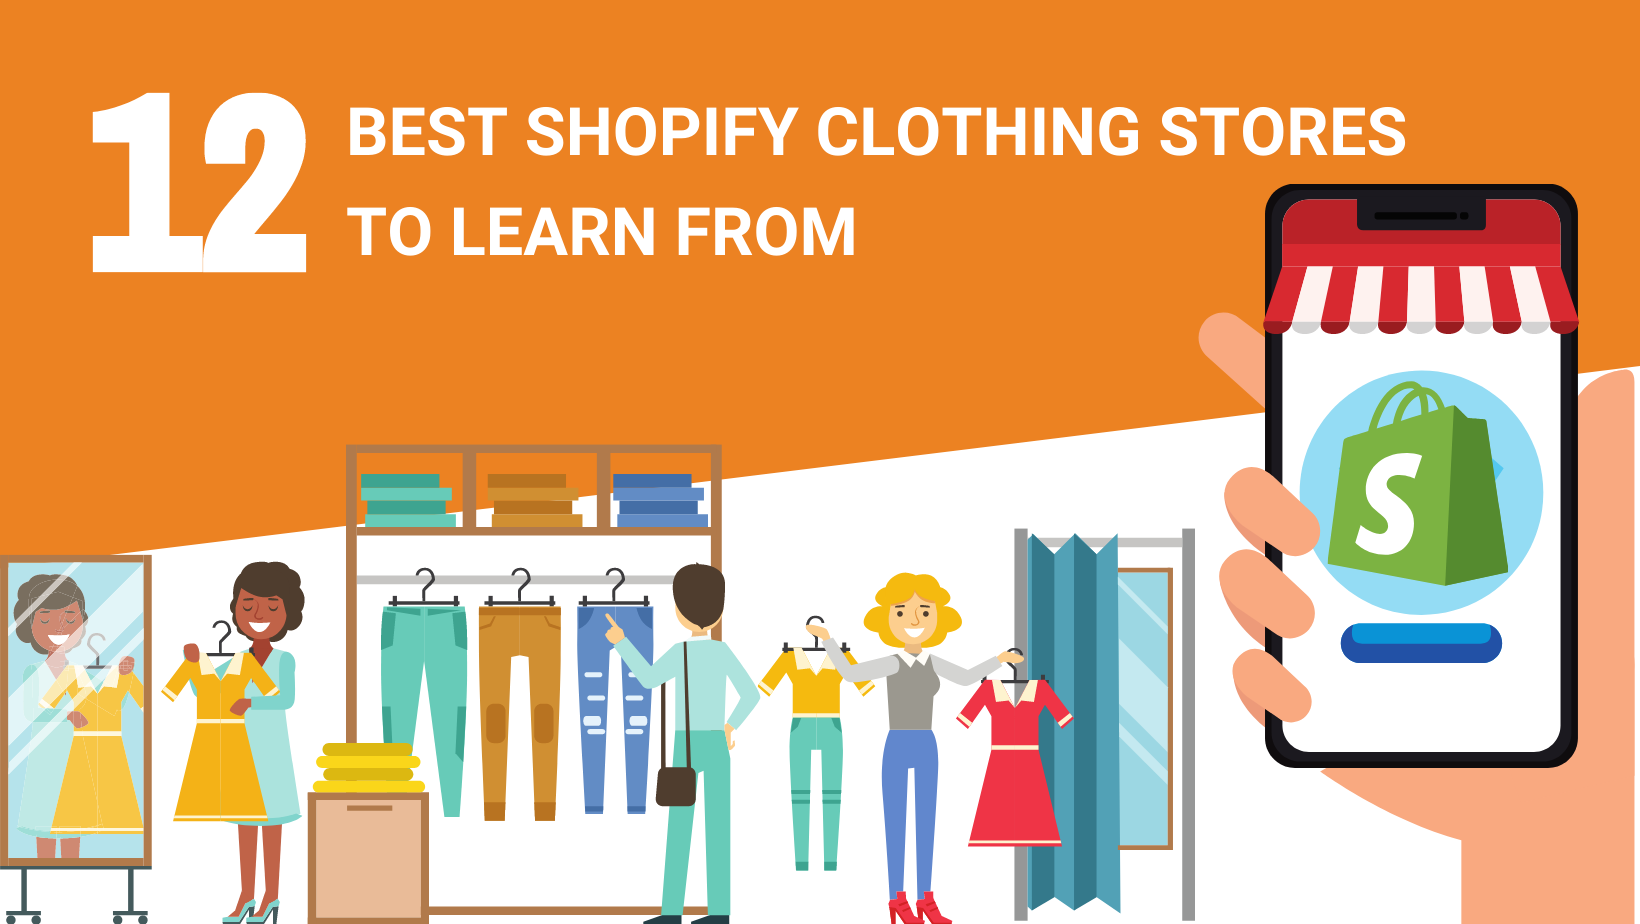 12 BEST SHOPIFY CLOTHING STORES TO LEARN FROM